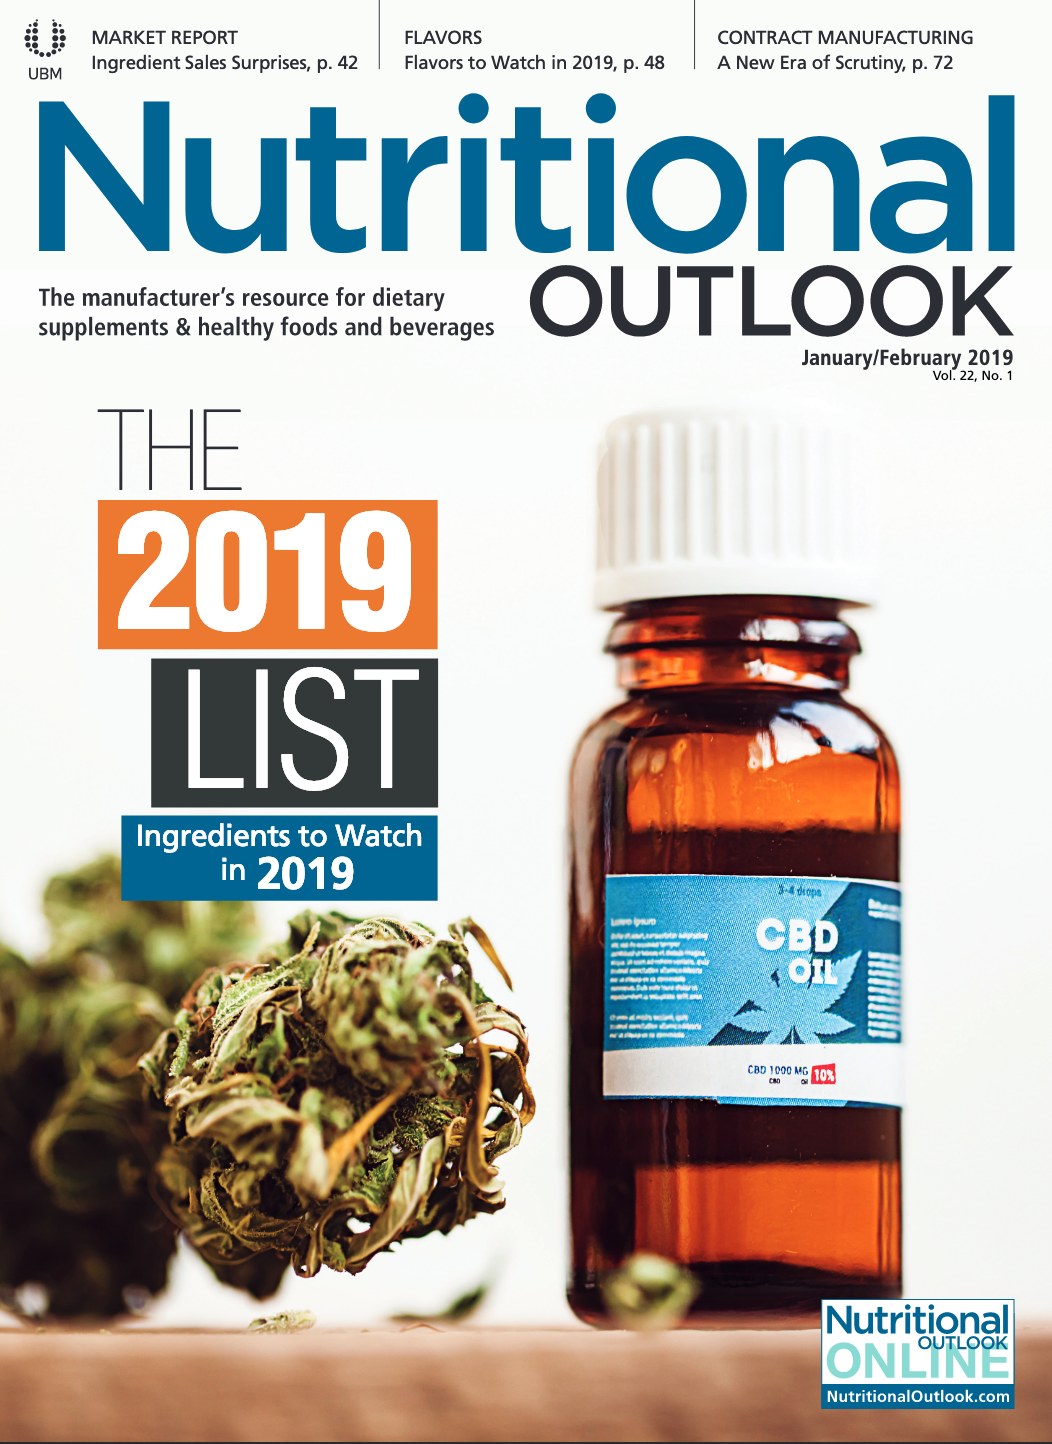 Nutritional Outlook Vol. 22 No. 1